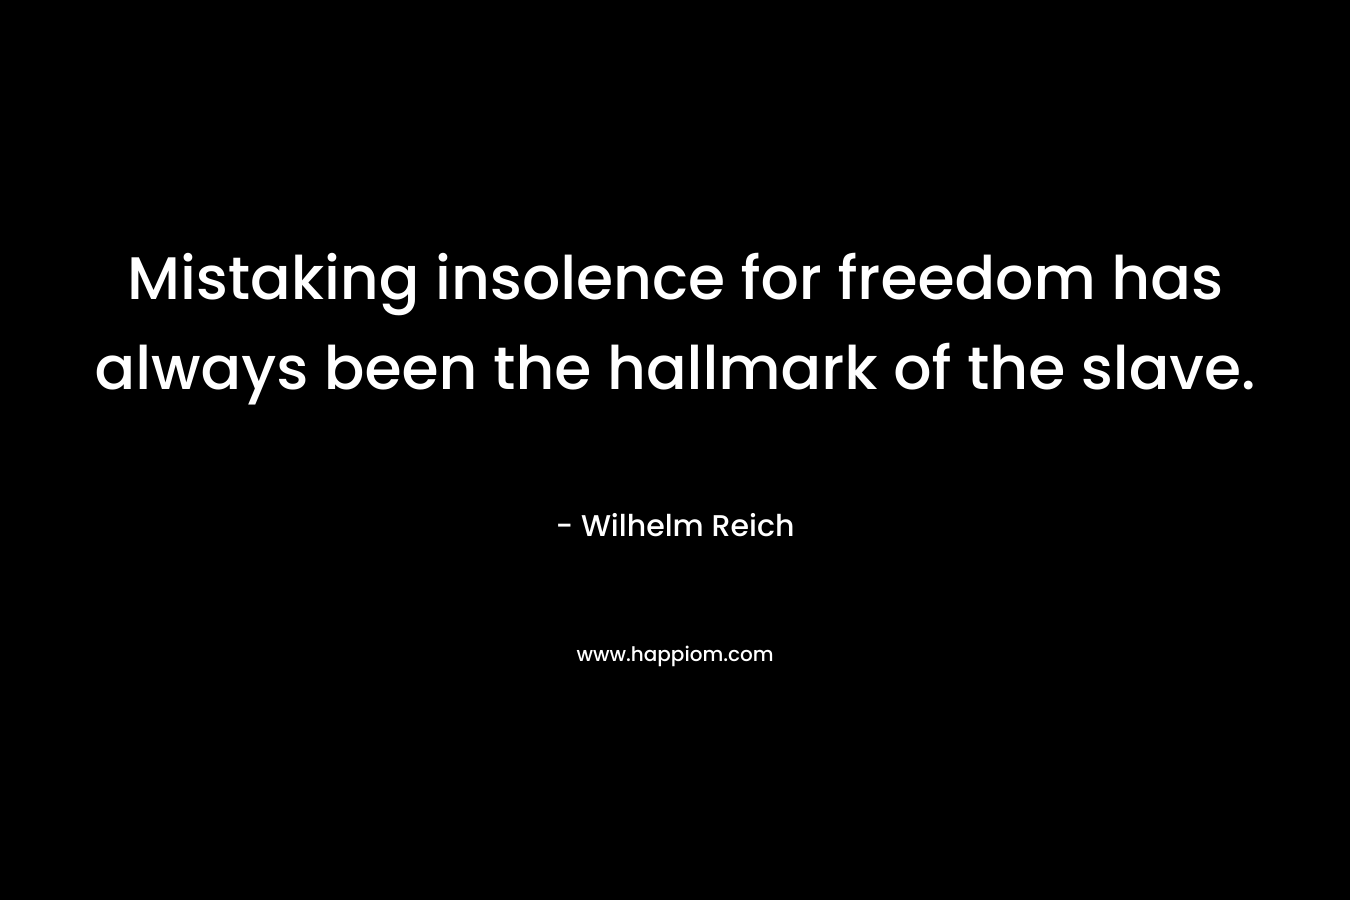 Mistaking insolence for freedom has always been the hallmark of the slave.